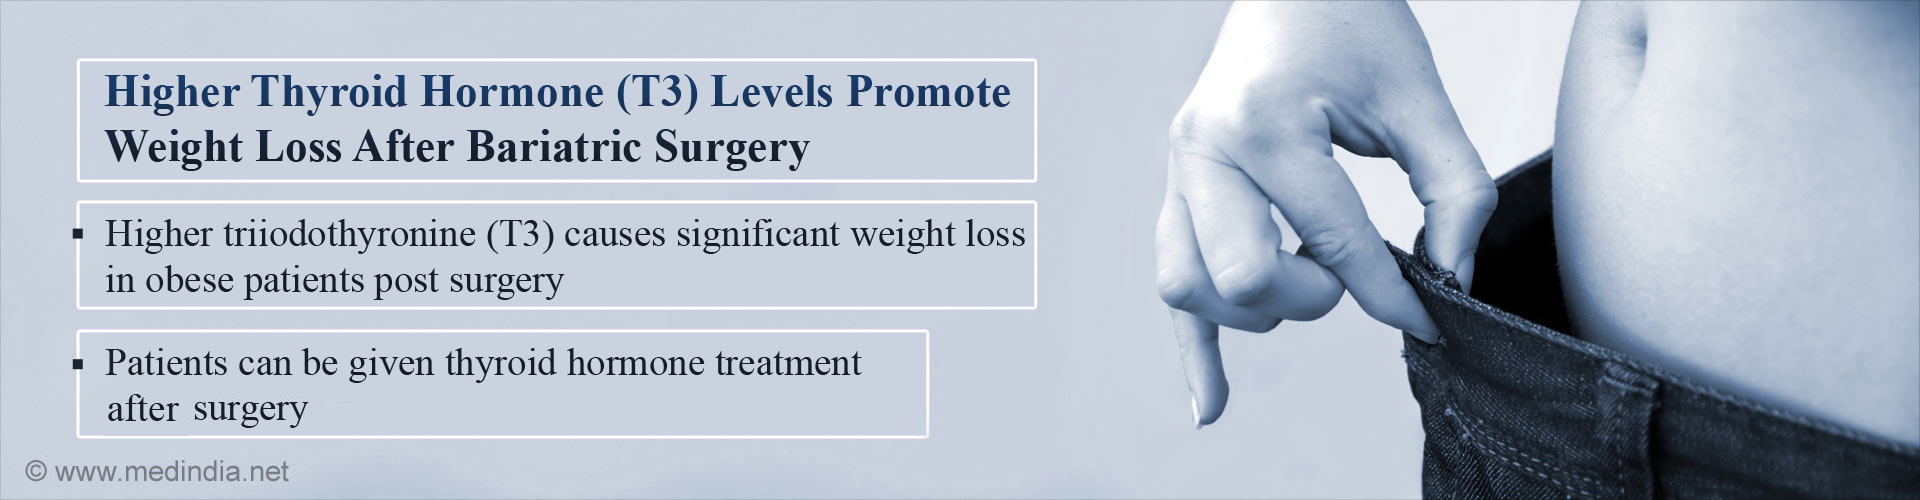 Higher Thyroid Hormone Levels (T3) Promote Weight Loss After Bariatric Surgery 
- Higher triiodothyronine (T3) causes significant weight loss in obese patients post surgery
- Patients can be given thyroid hormone treatment after surgery